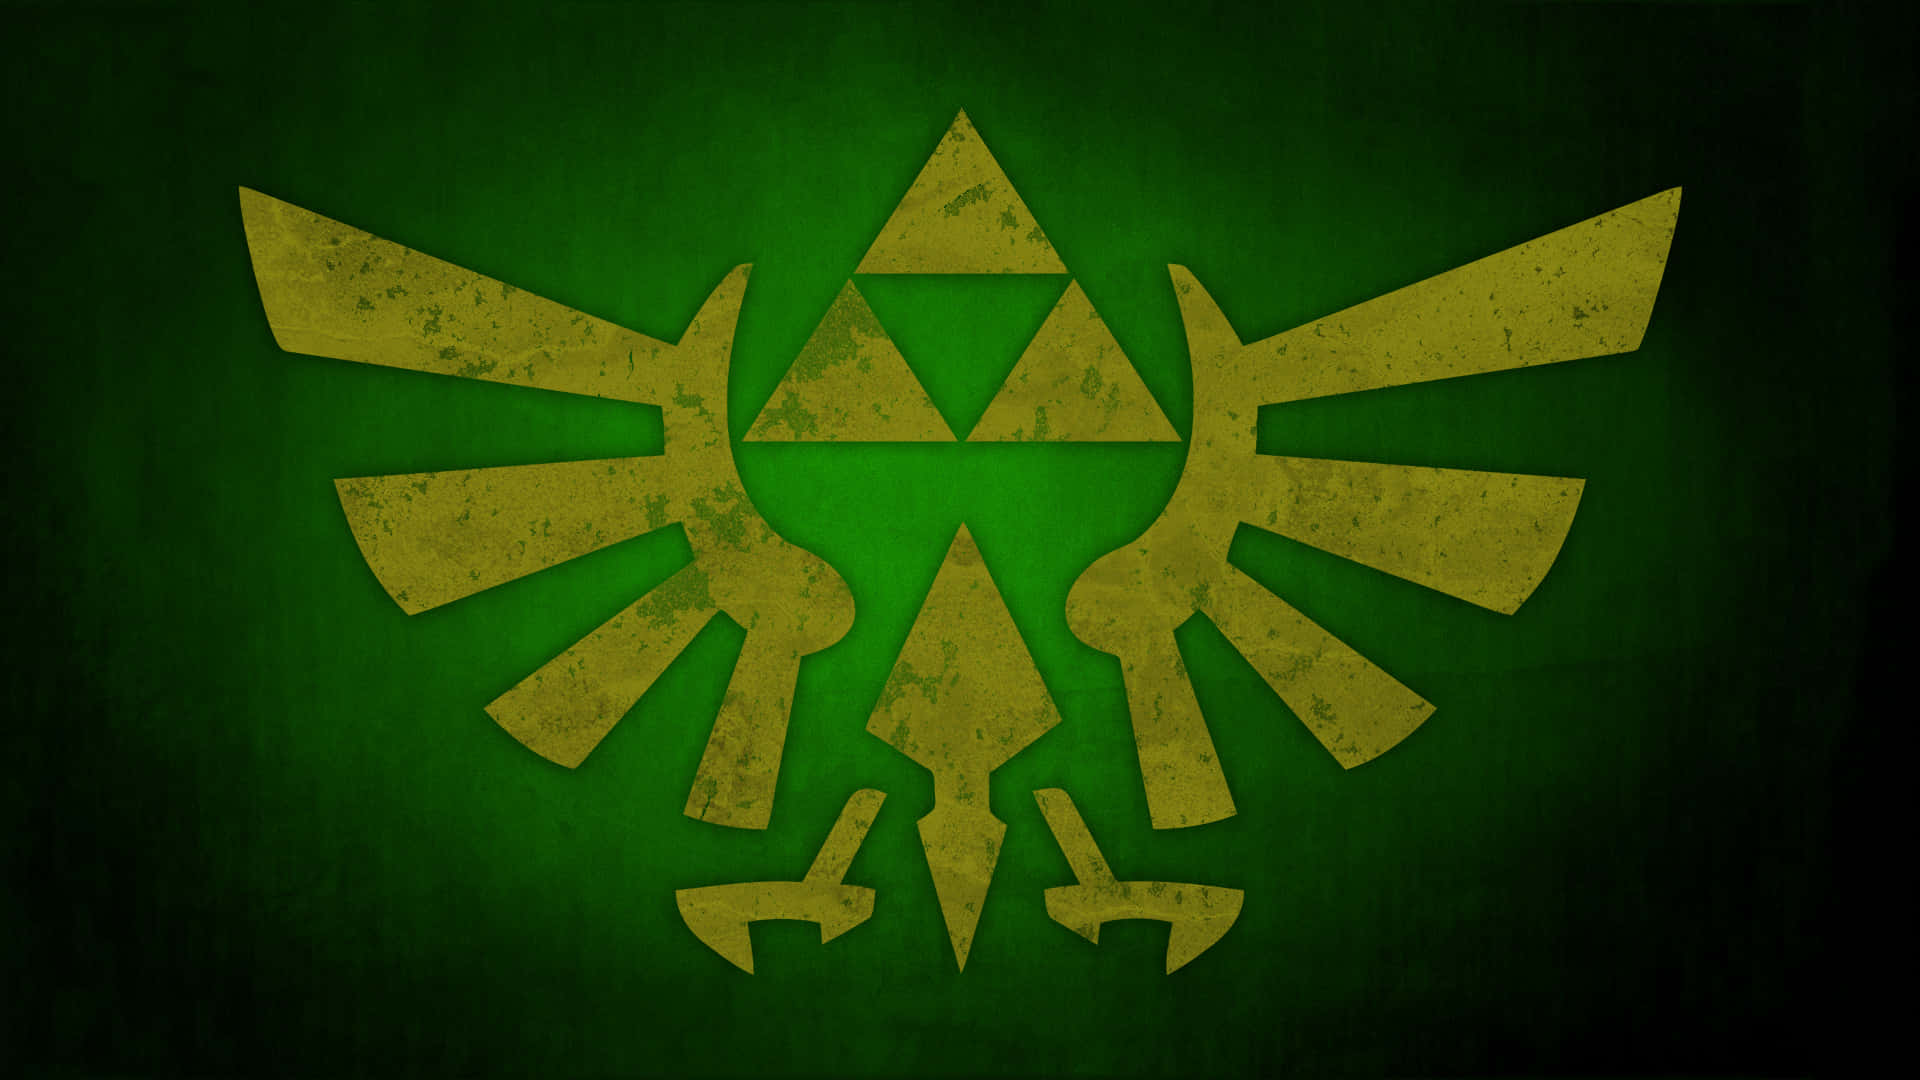 The Triforce - Strength, Courage And Wisdom